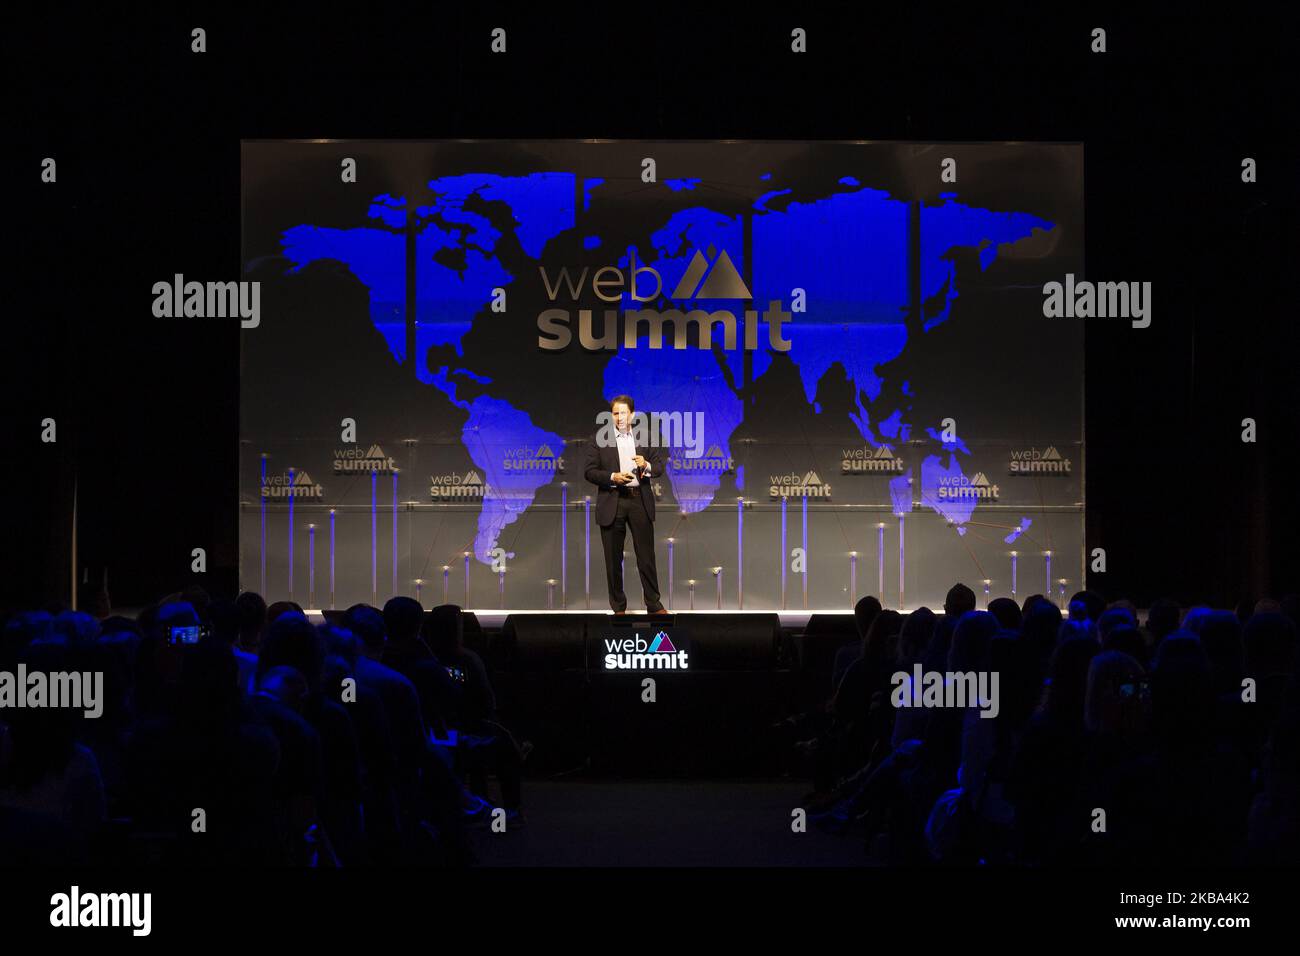 Marcus Weldon (Nokia) speaks at at Center Stage of Web Summit in Altice Arena on November 05, 2019 in Lisbon, Portugal. Web Summit is an annual technology conference which brings together a variety of technology companies to discuss the future of industry. This year's event runs from November 4- 7 and is expected to attract around 70,000 participants. Stock Photo